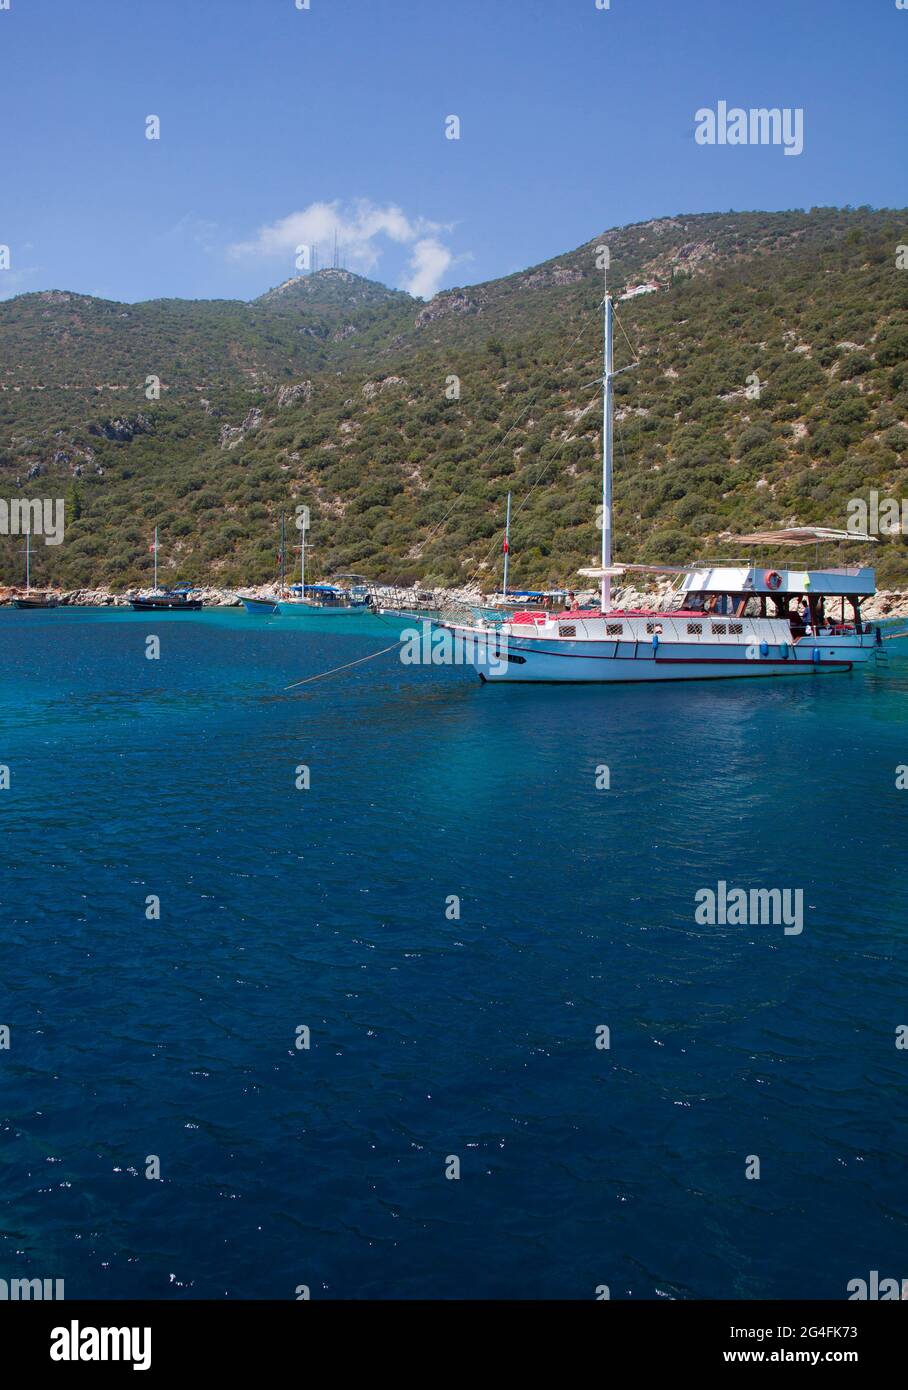 Charter boats moored in a secluded part of the bay of Kalkan in Turkey.  Kalkan is a popular holiday destination and is located on the Turkish Mediter Stock Photo